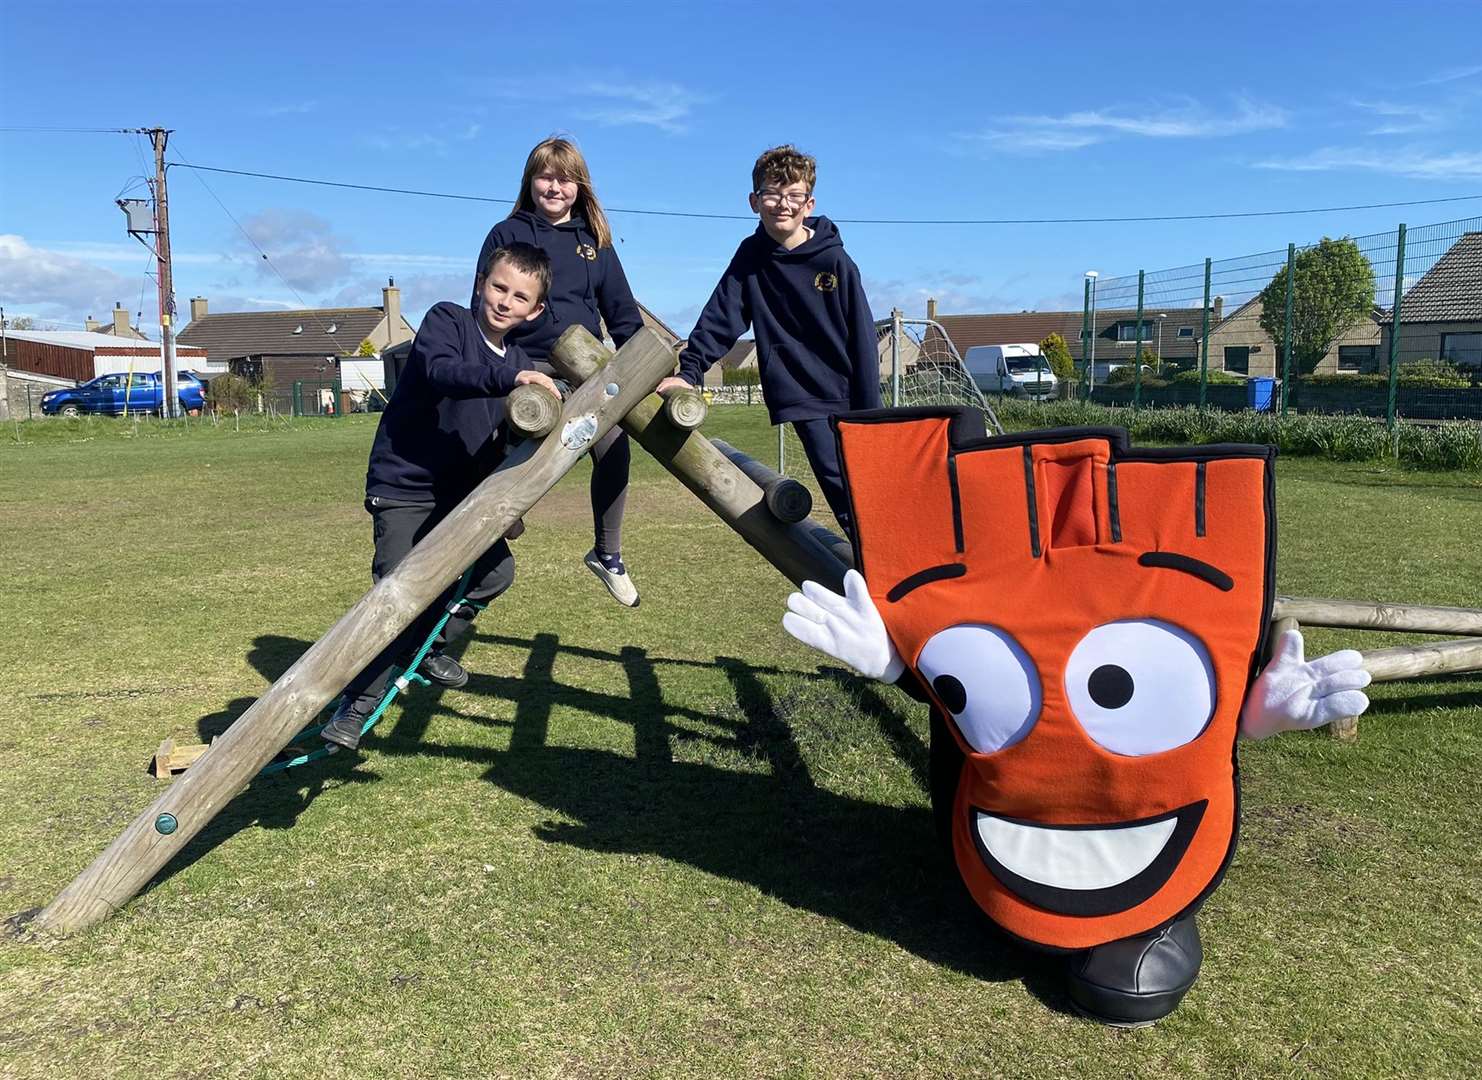 P5 pupils showing Strider some of their play equipment.